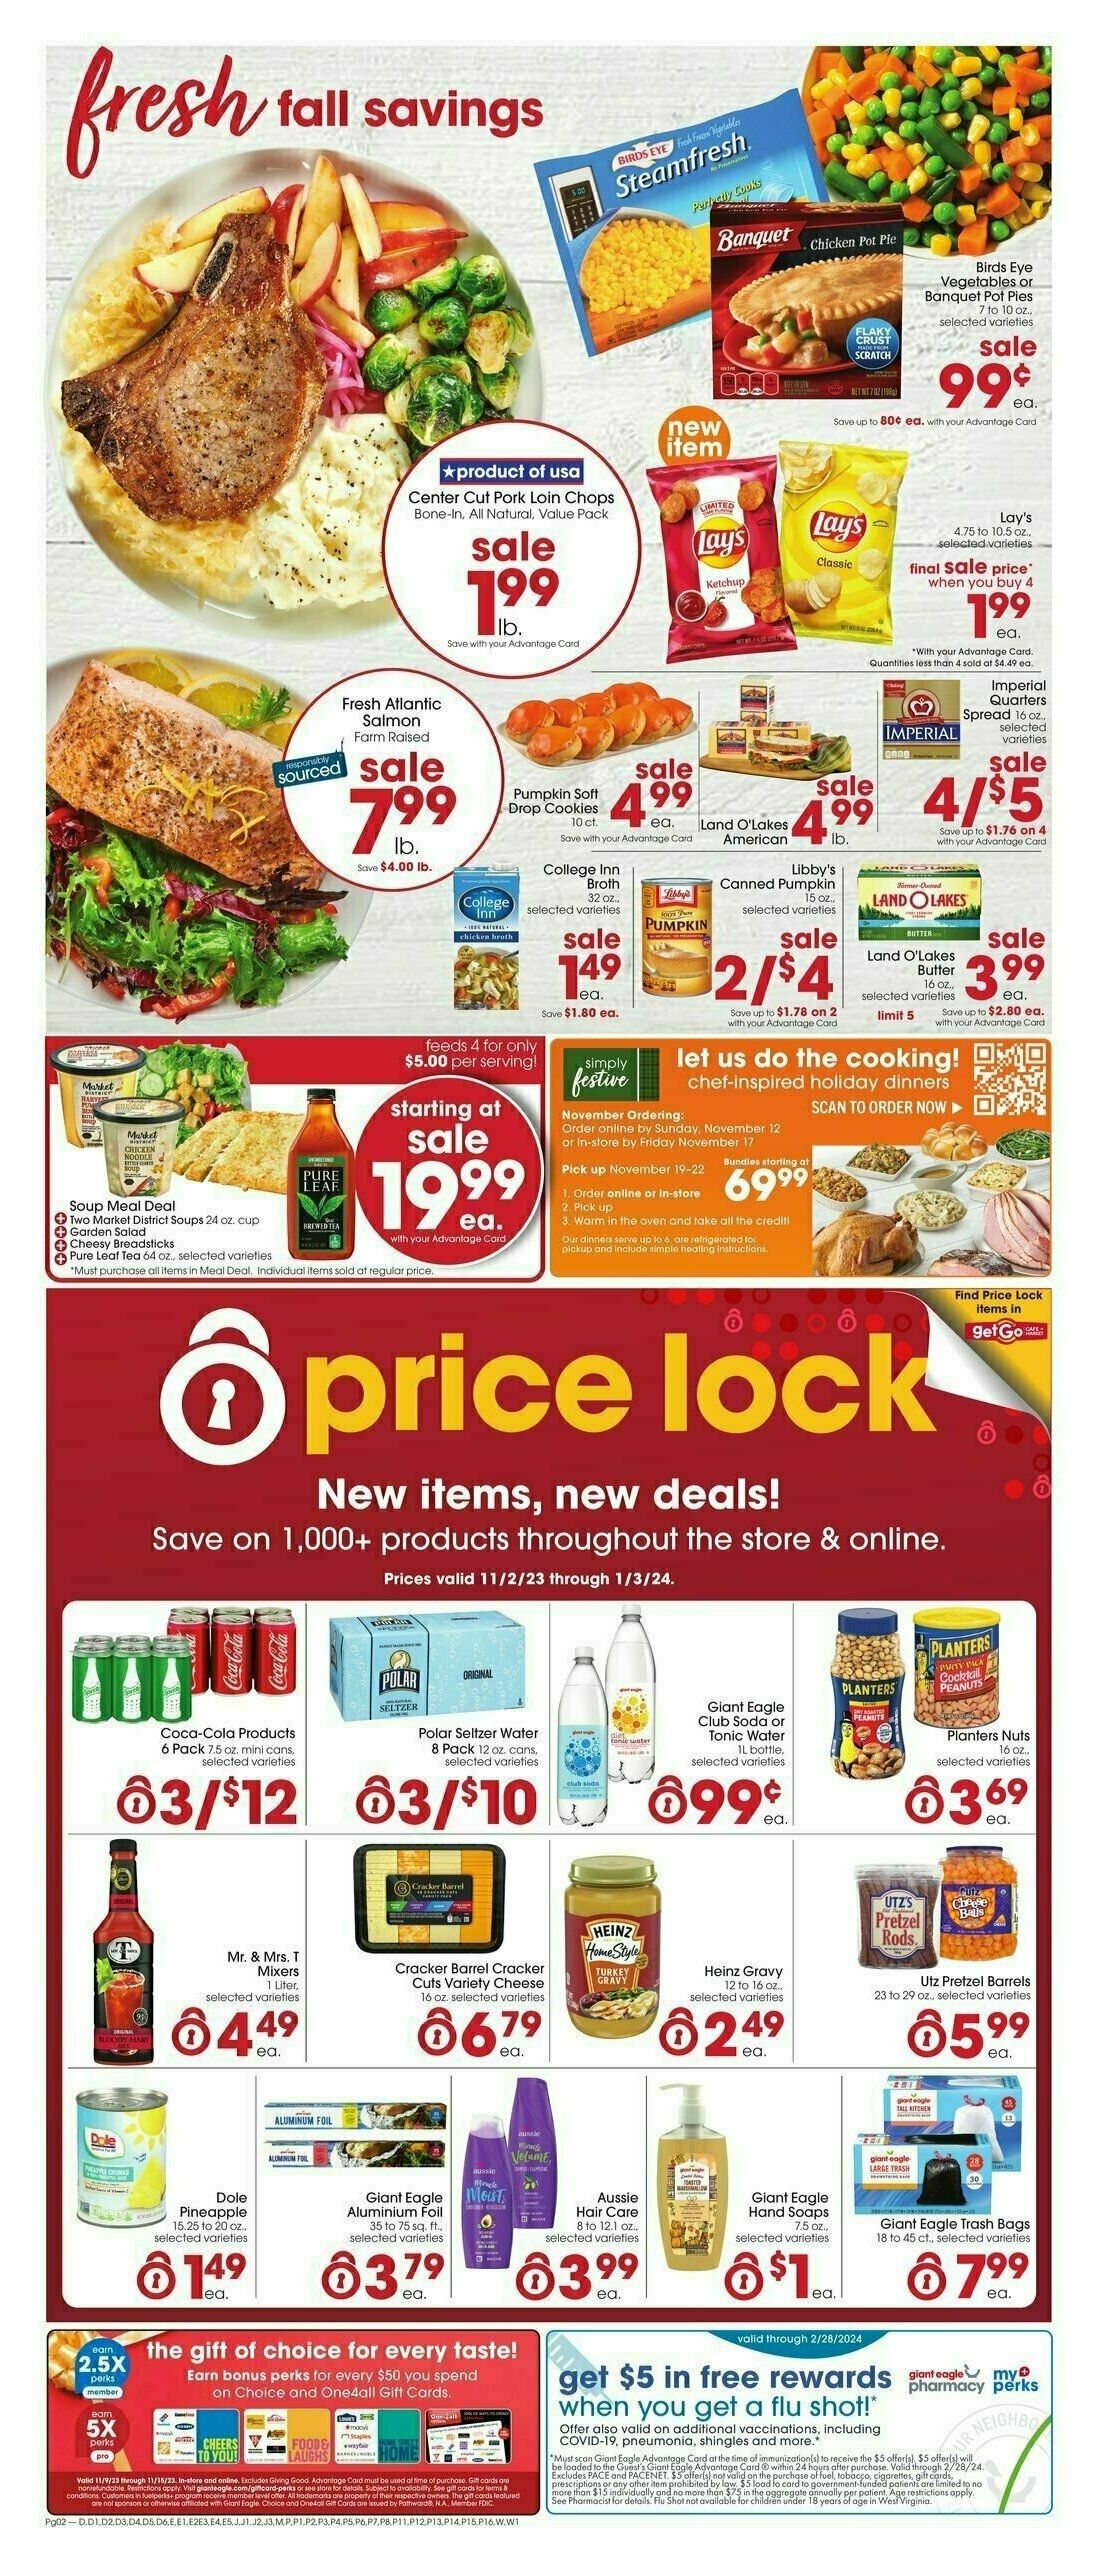 Giant Eagle Weekly Ad from November 9